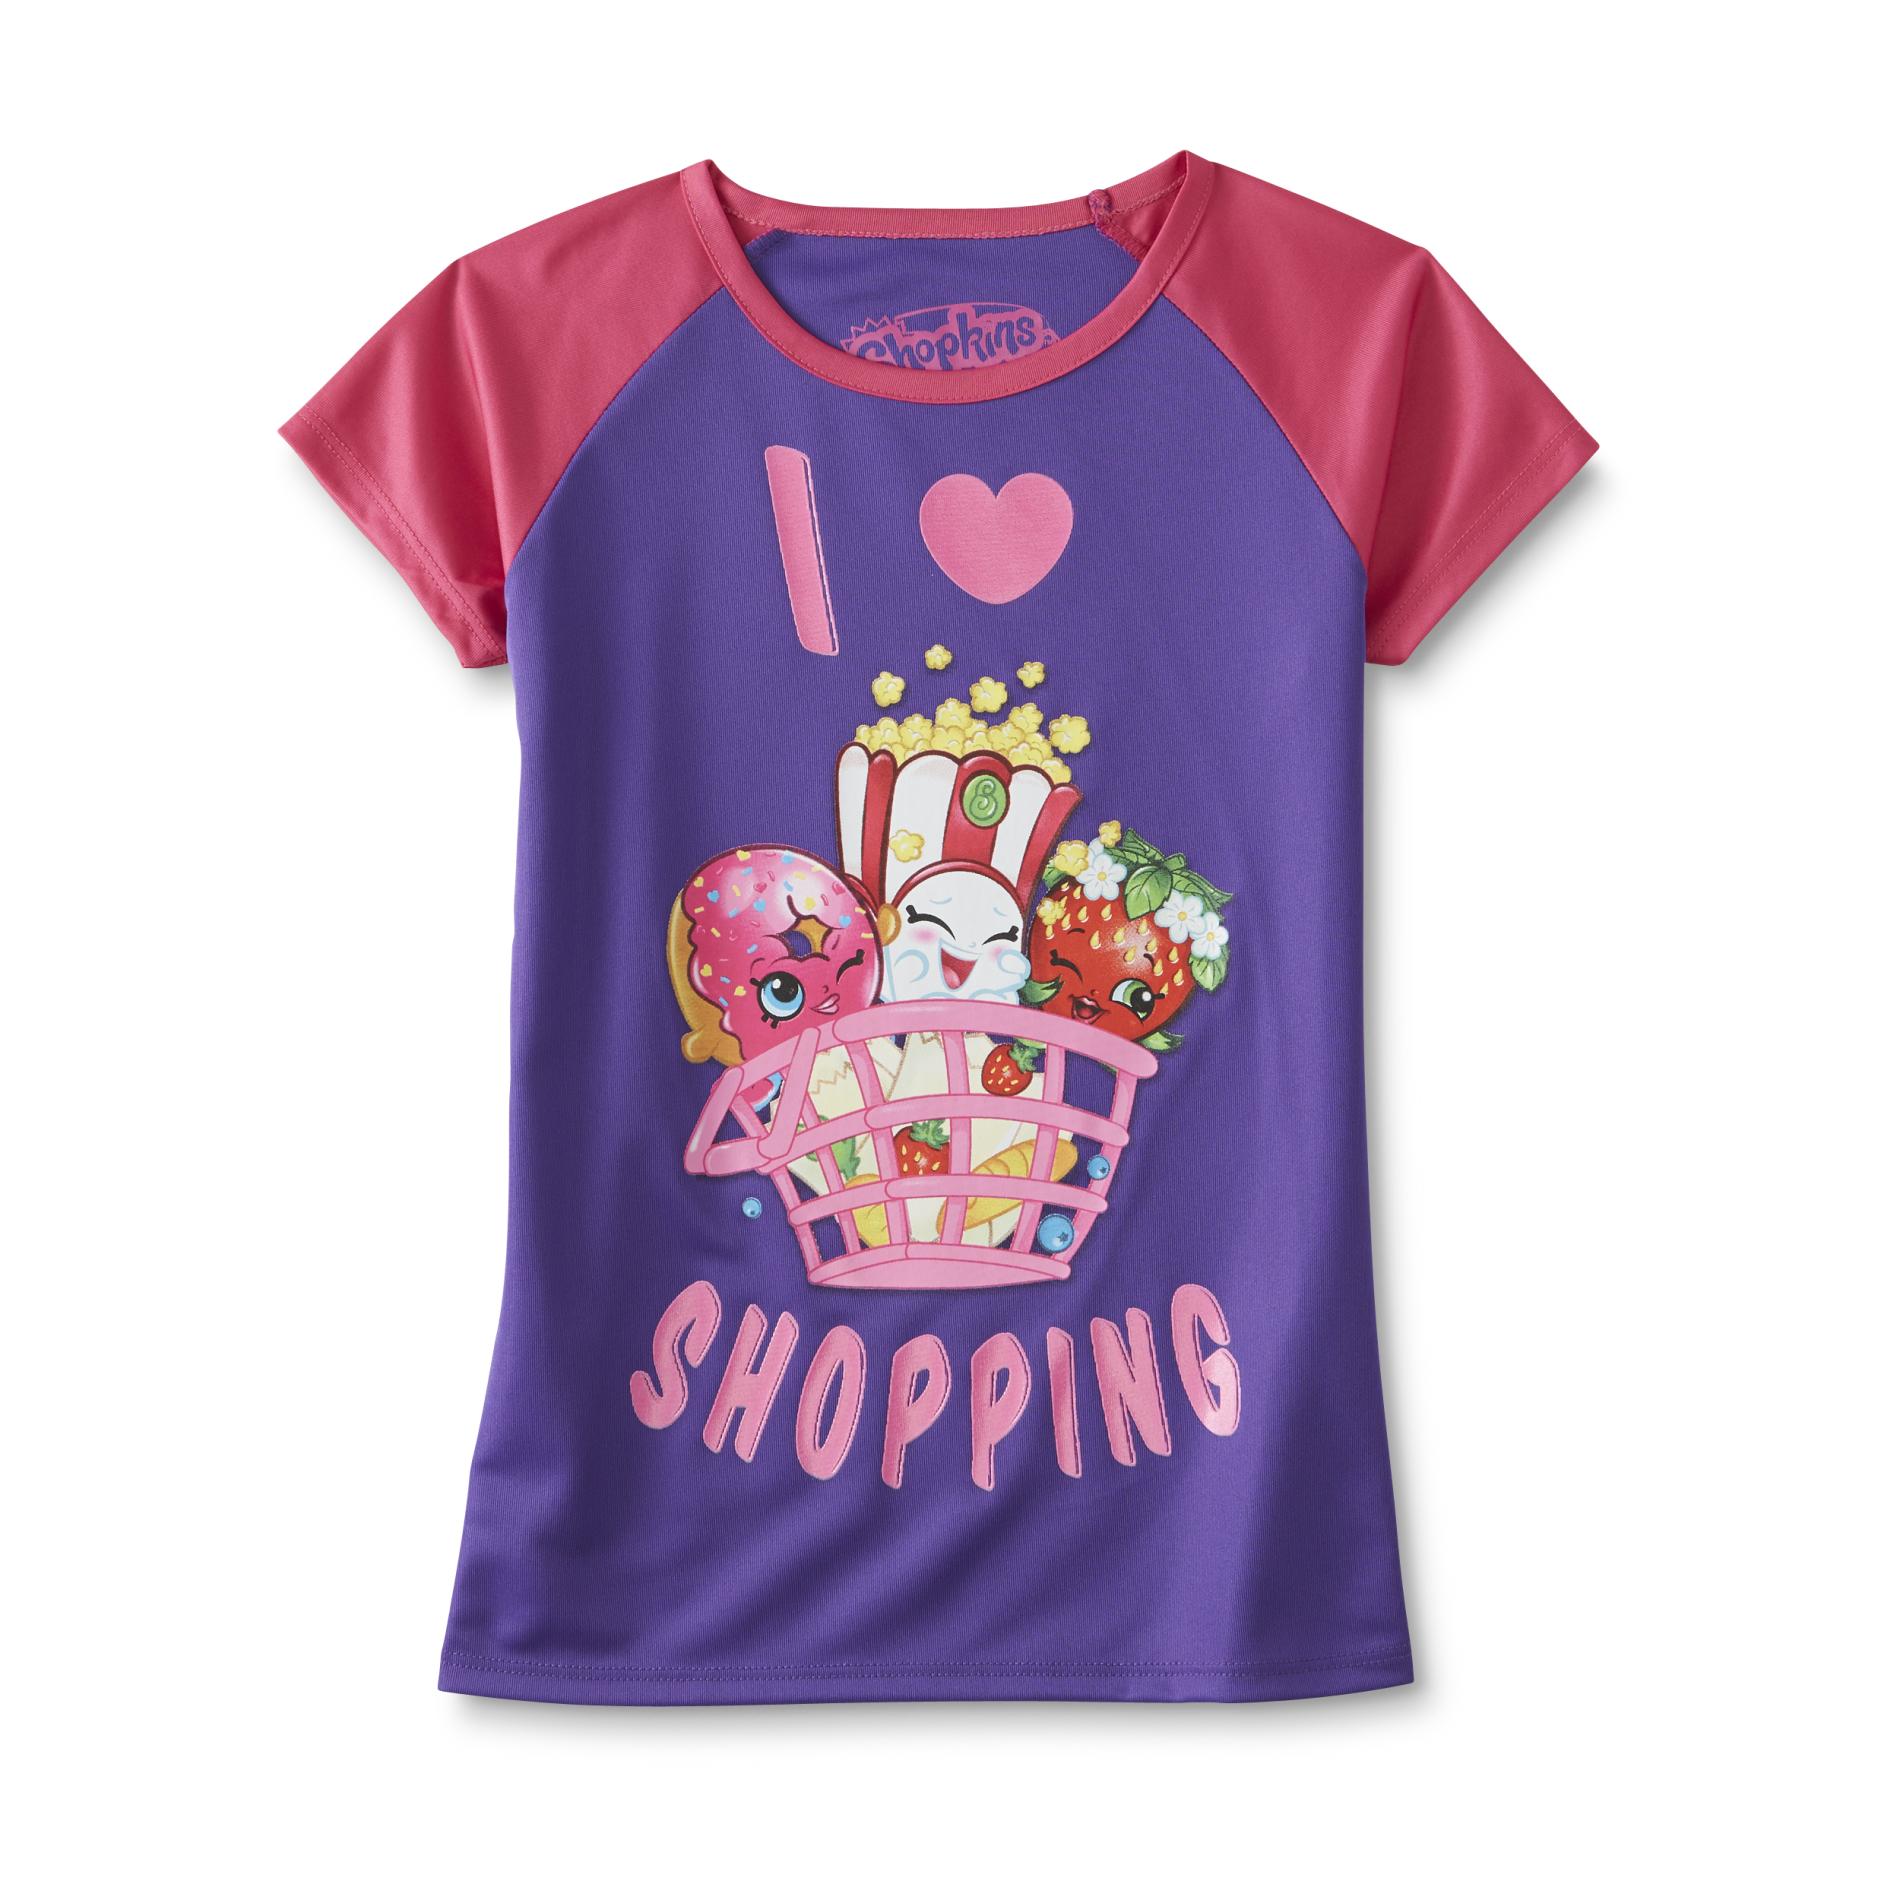 Shopkins Girl's Graphic Athletic T-Shirt